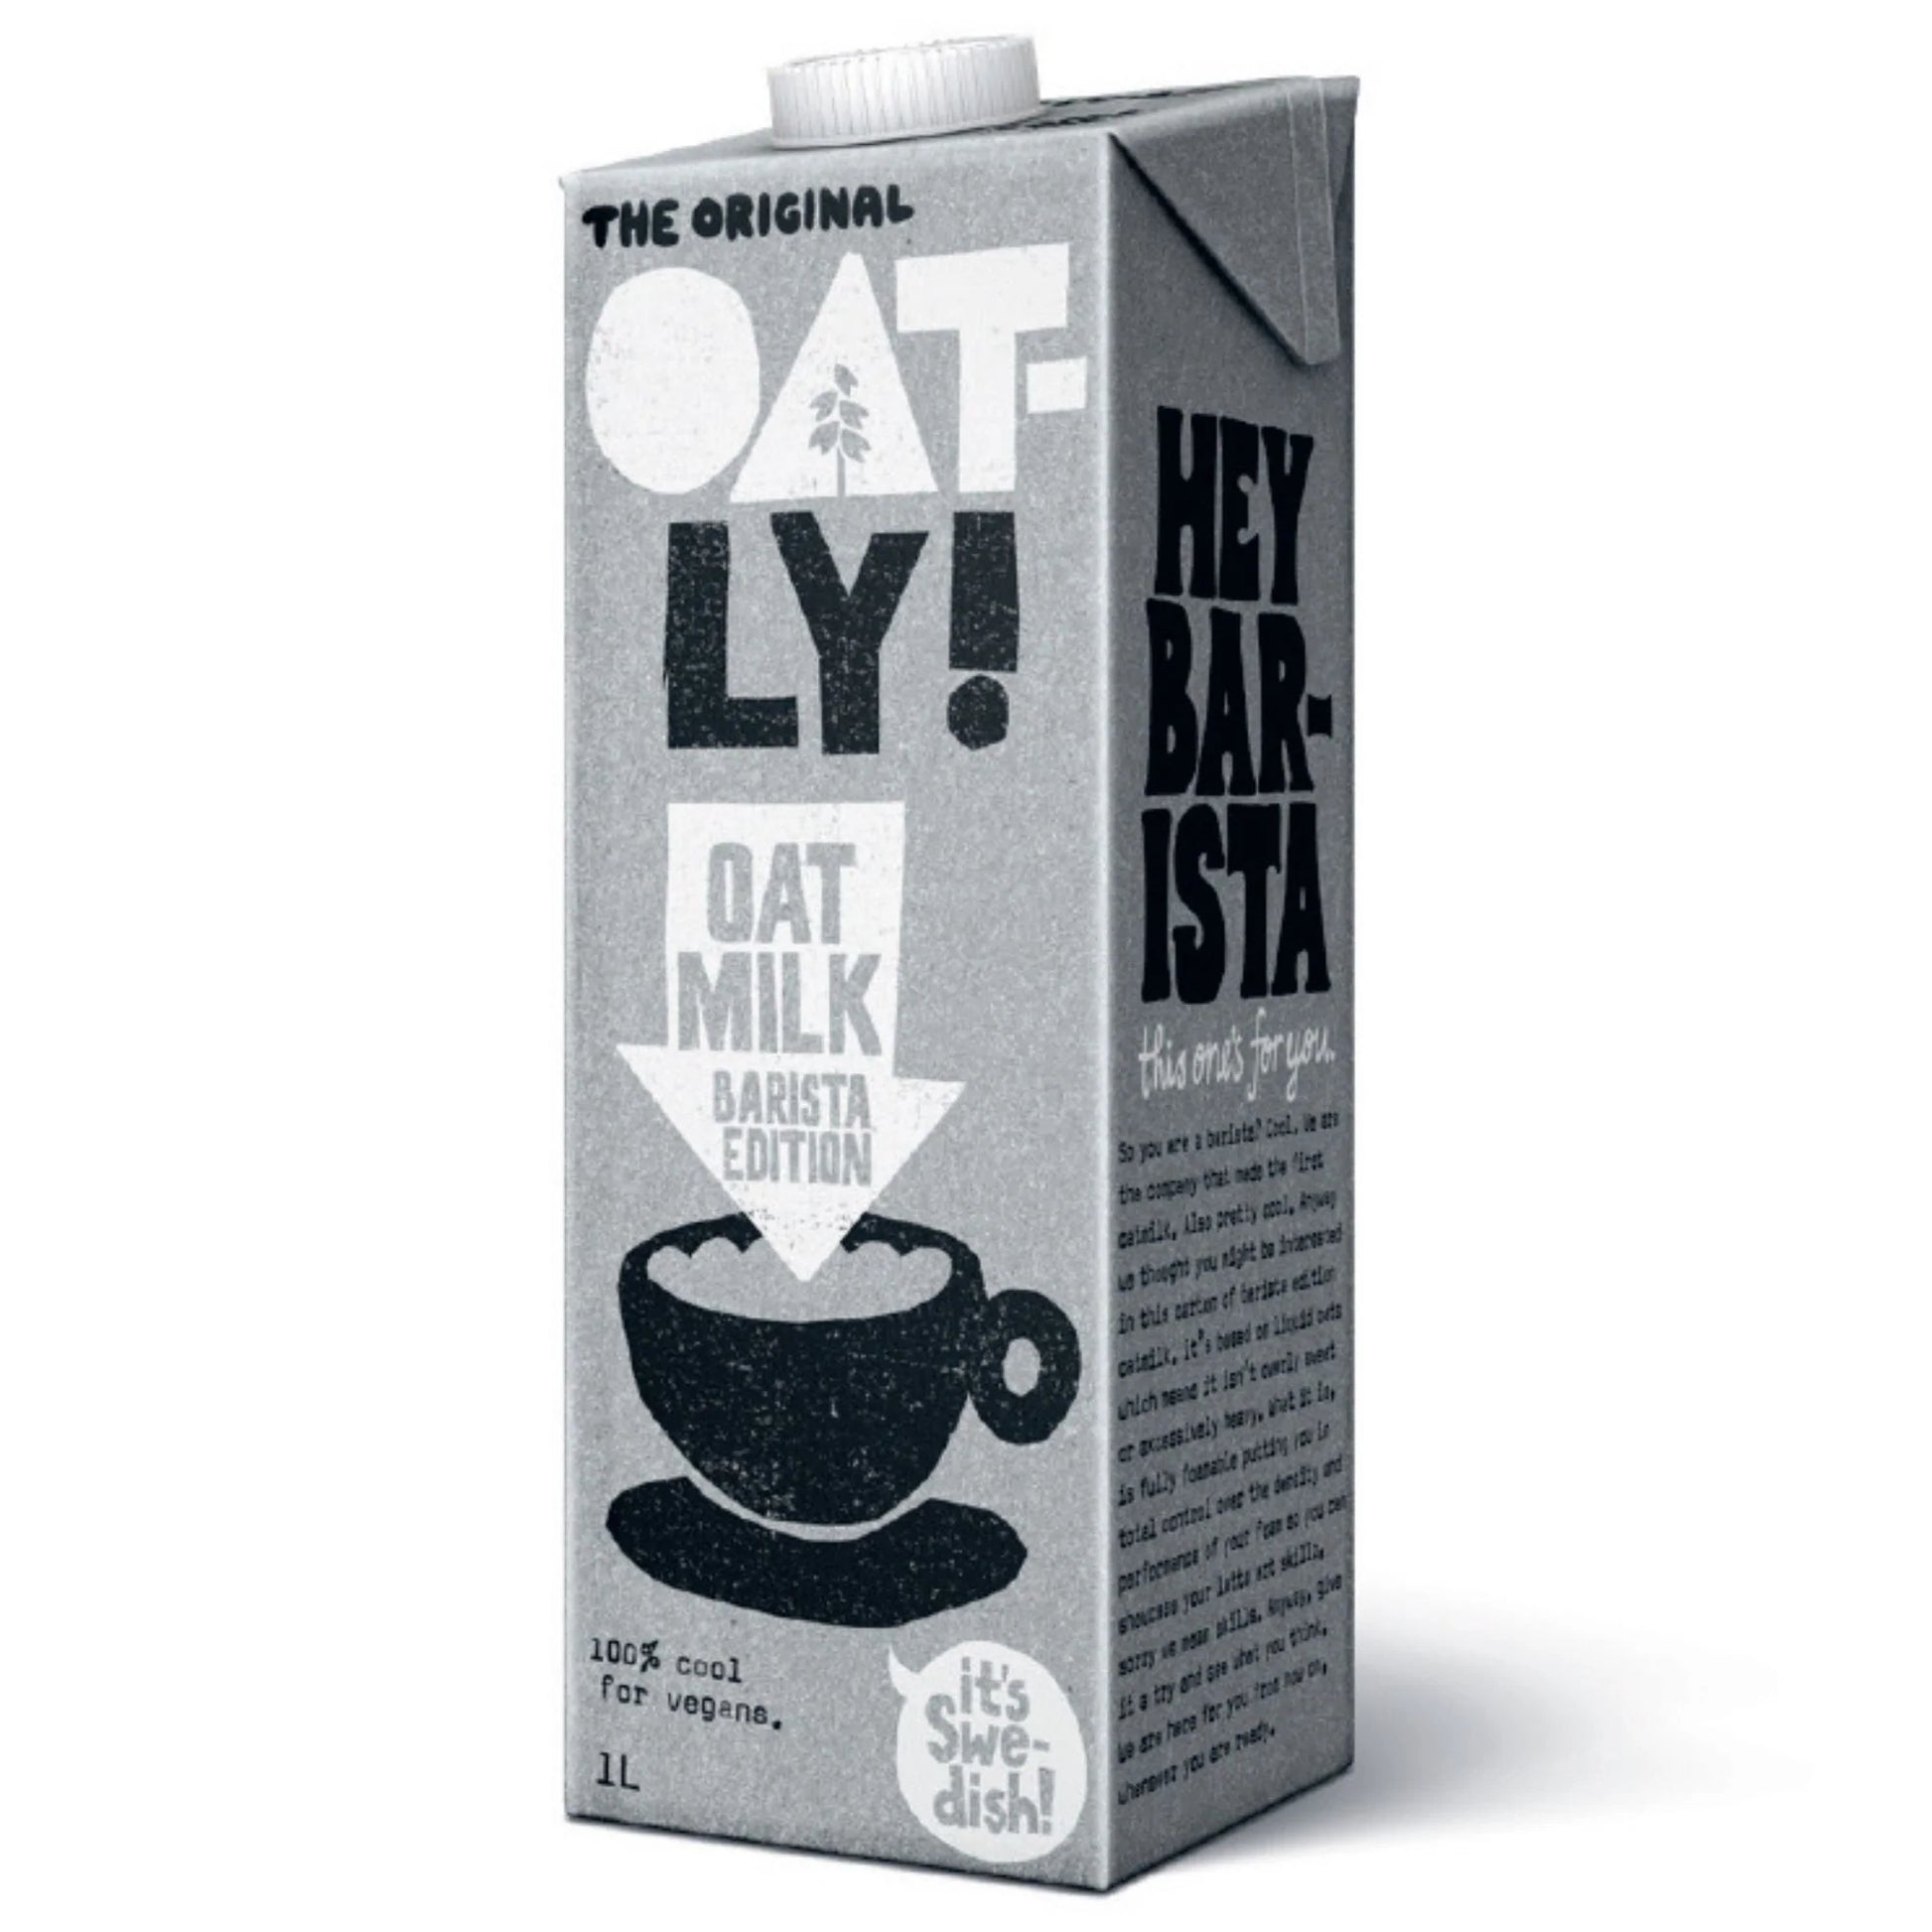 Oatly Oat Milk Barista Edition Foam & Frother Wand - Bundle Contains 4  Oatly Milk 32oz Bottles and 1 Grateful Grocer Milk Frother Handheld Perfect